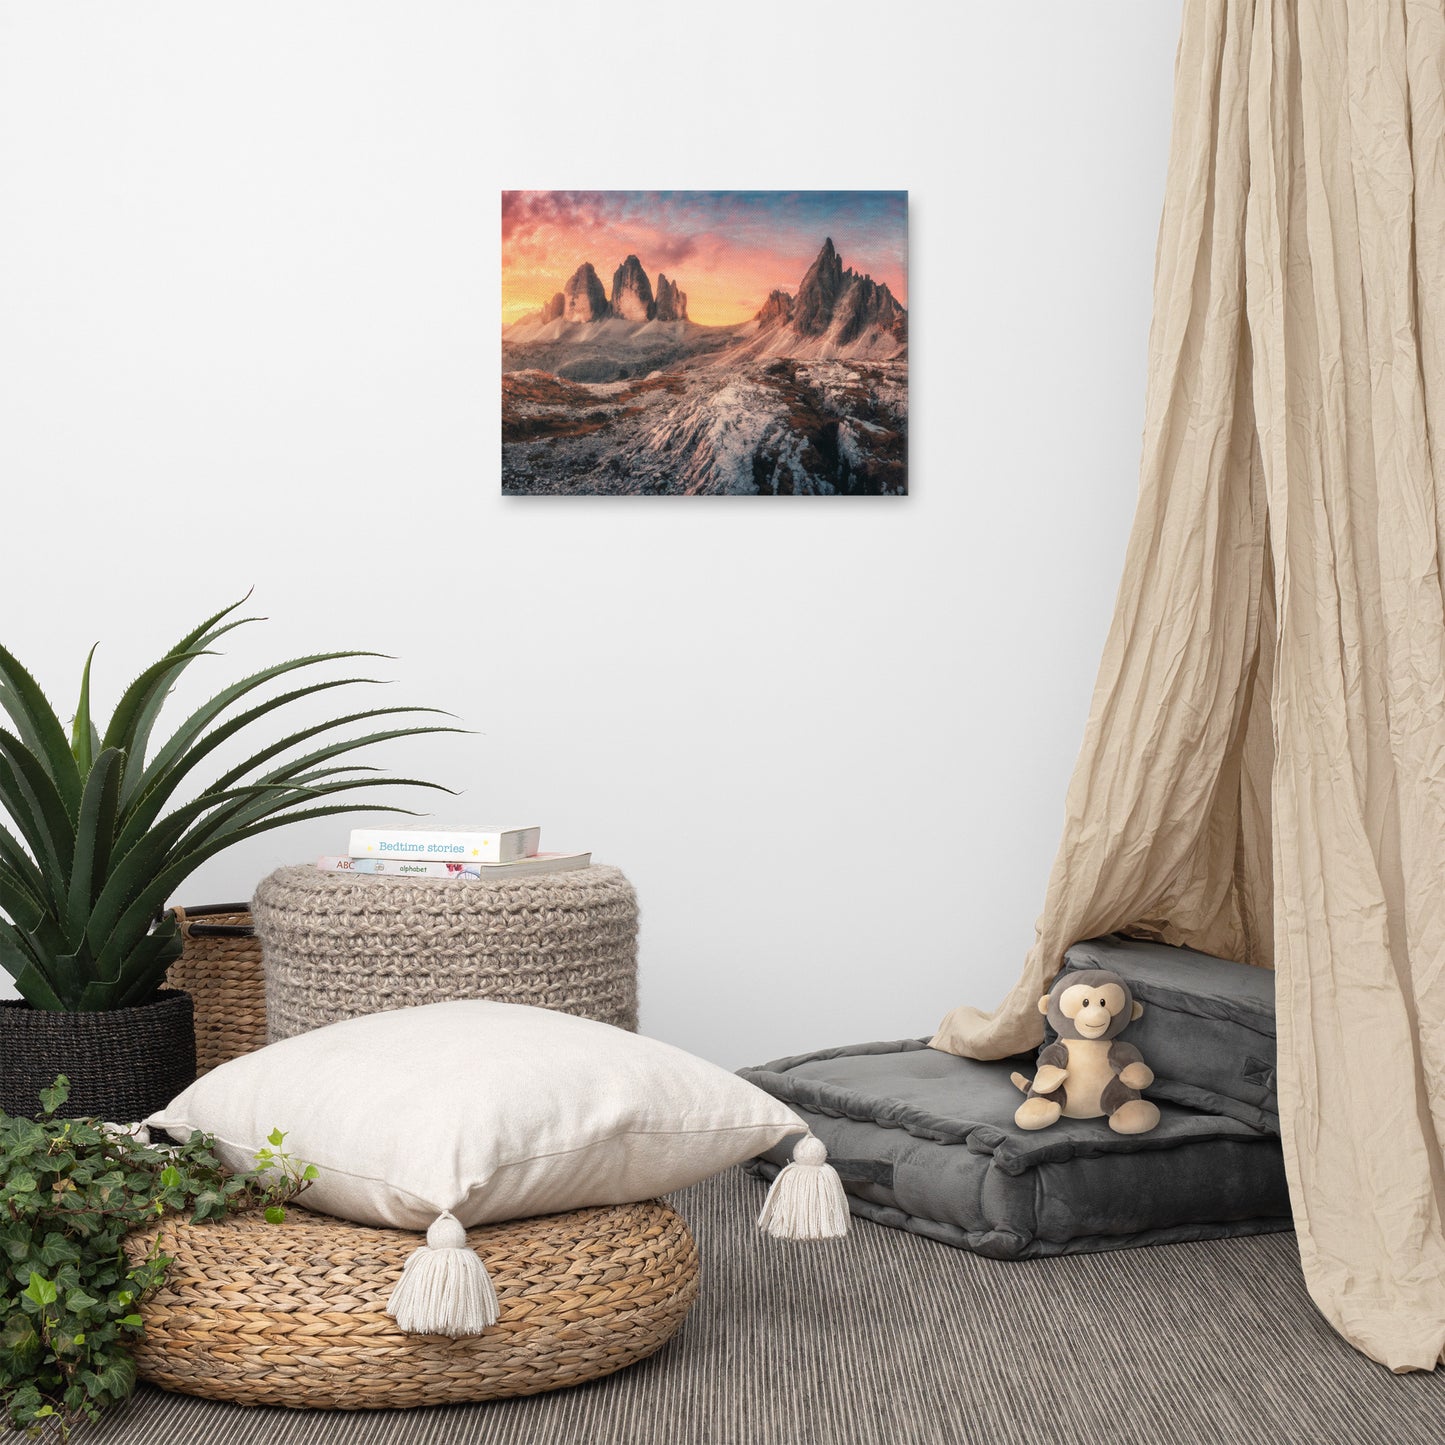 Mountains Colorful Cloudy Sunset 2 Landscape Photo Canvas Wall Art Prints